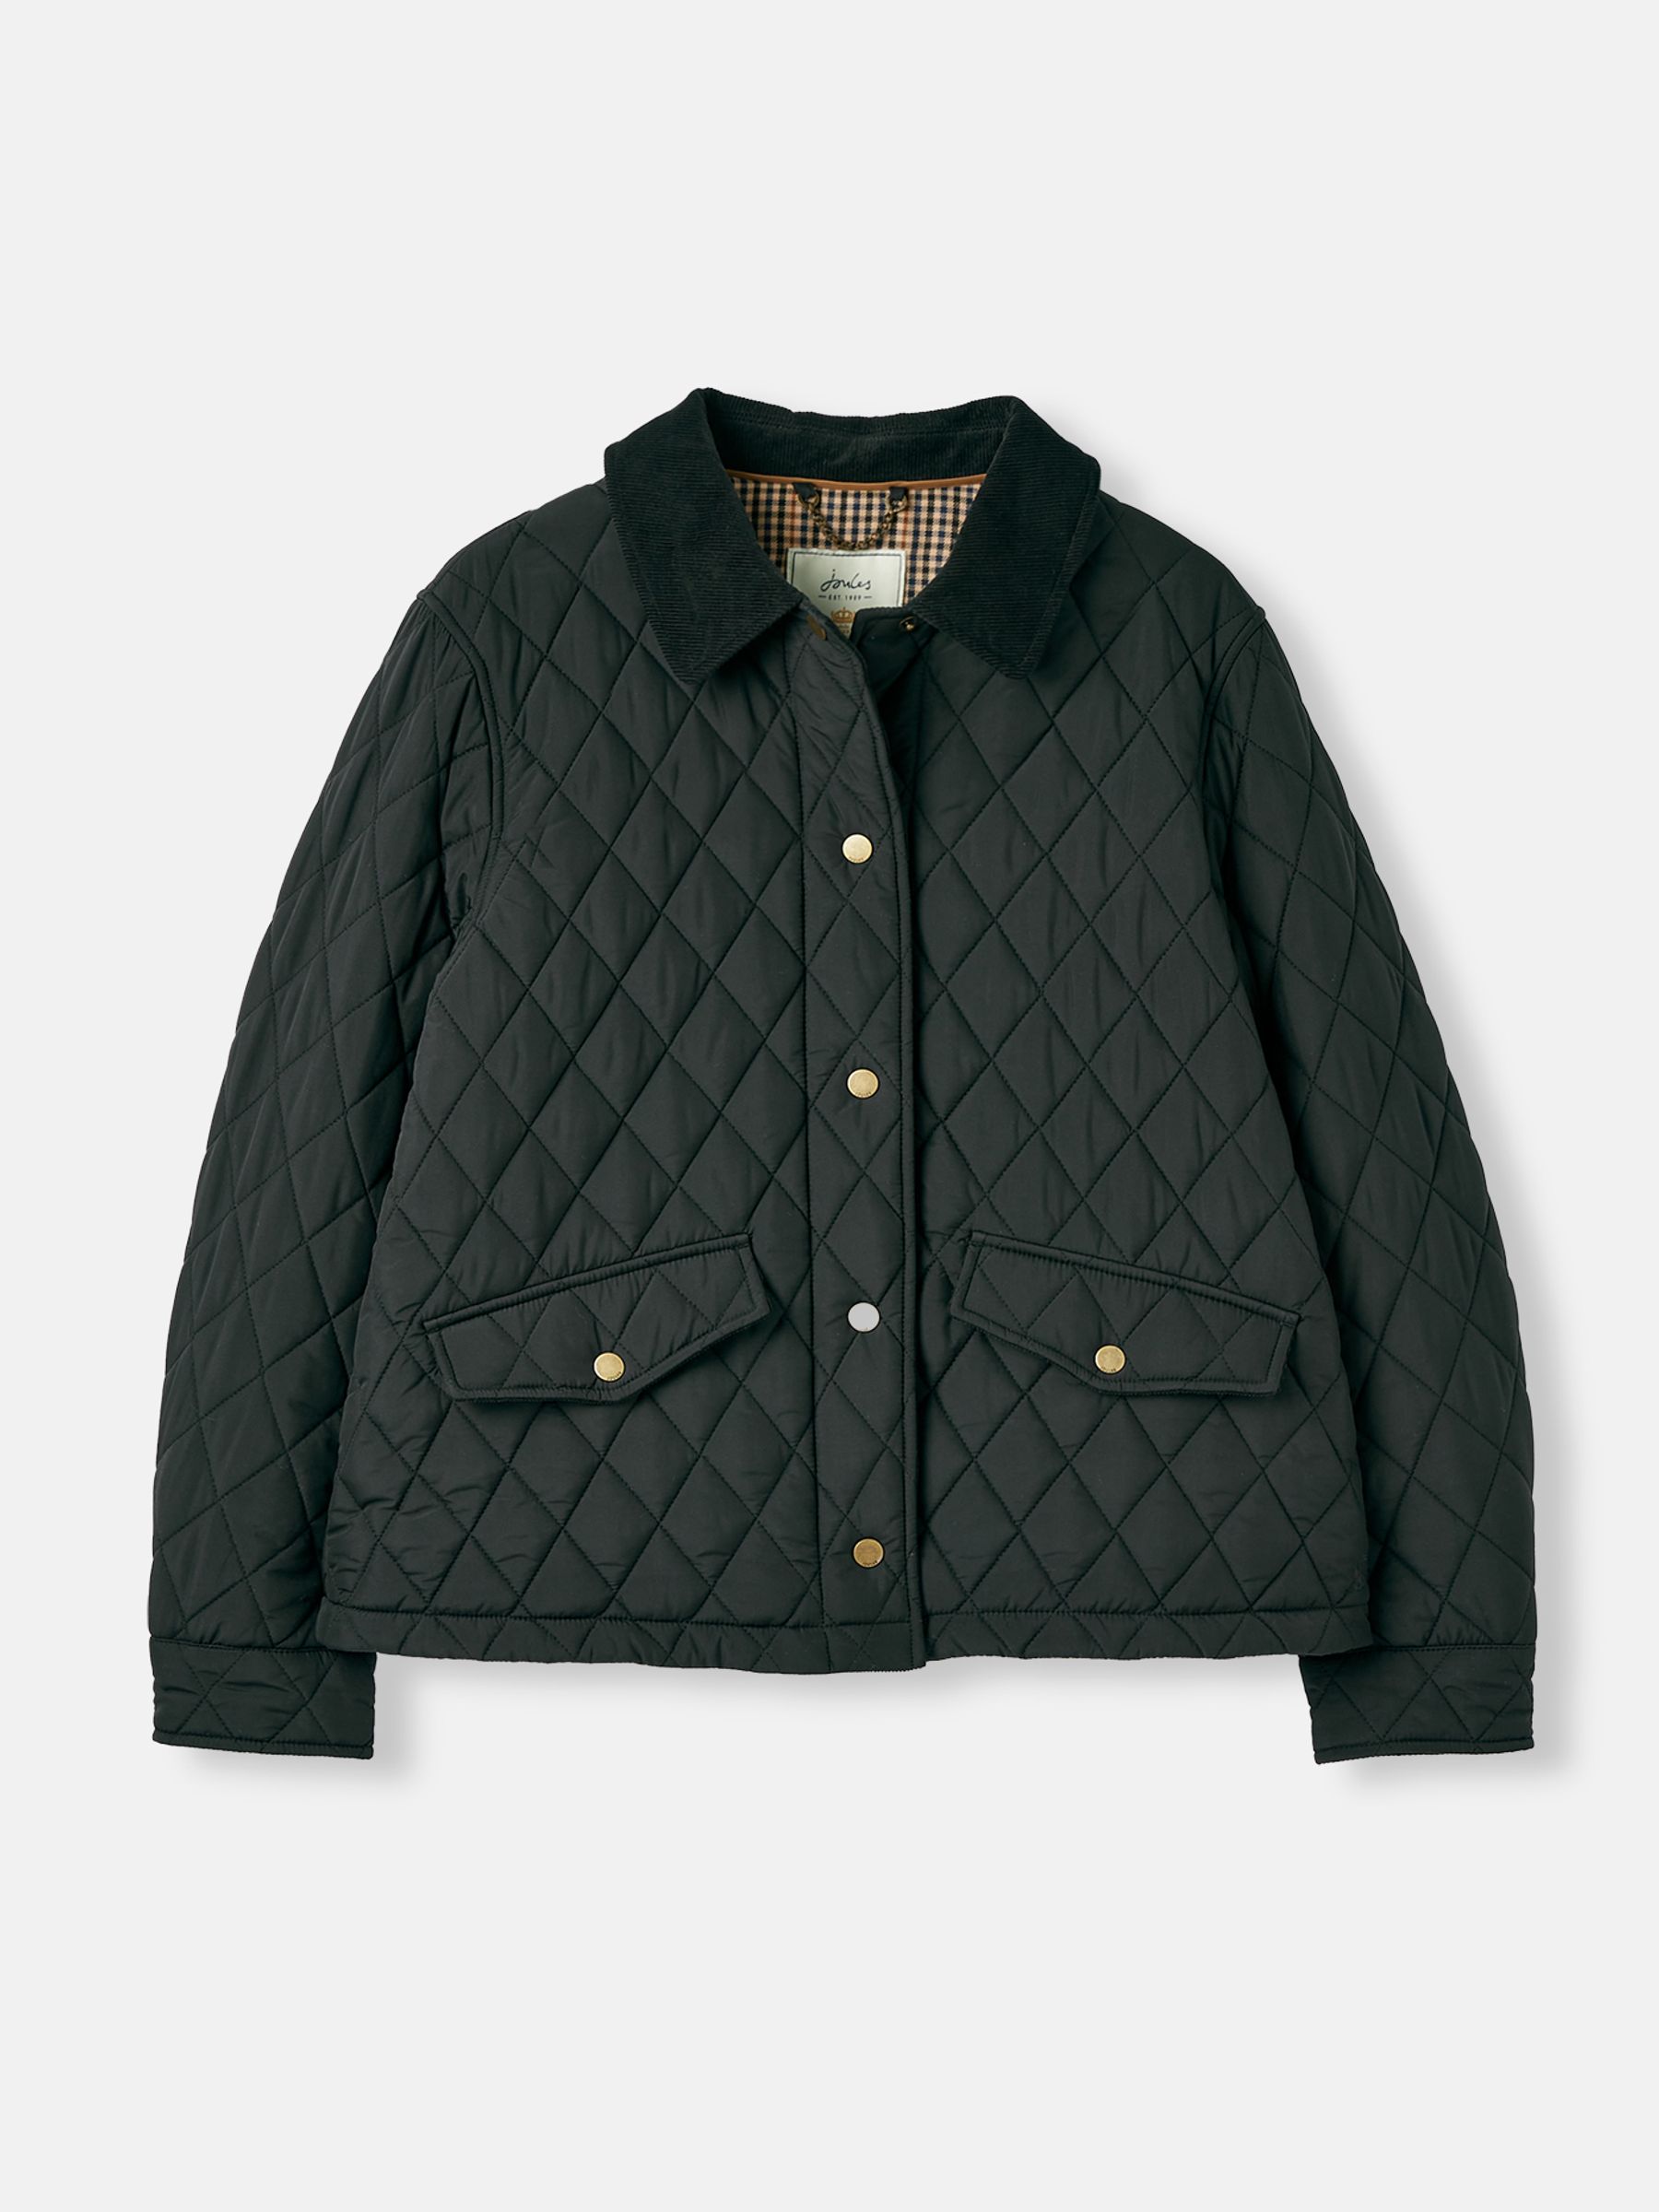 Buy Joules Arlington Showerproof Diamond Quilted Jacket from the Joules ...